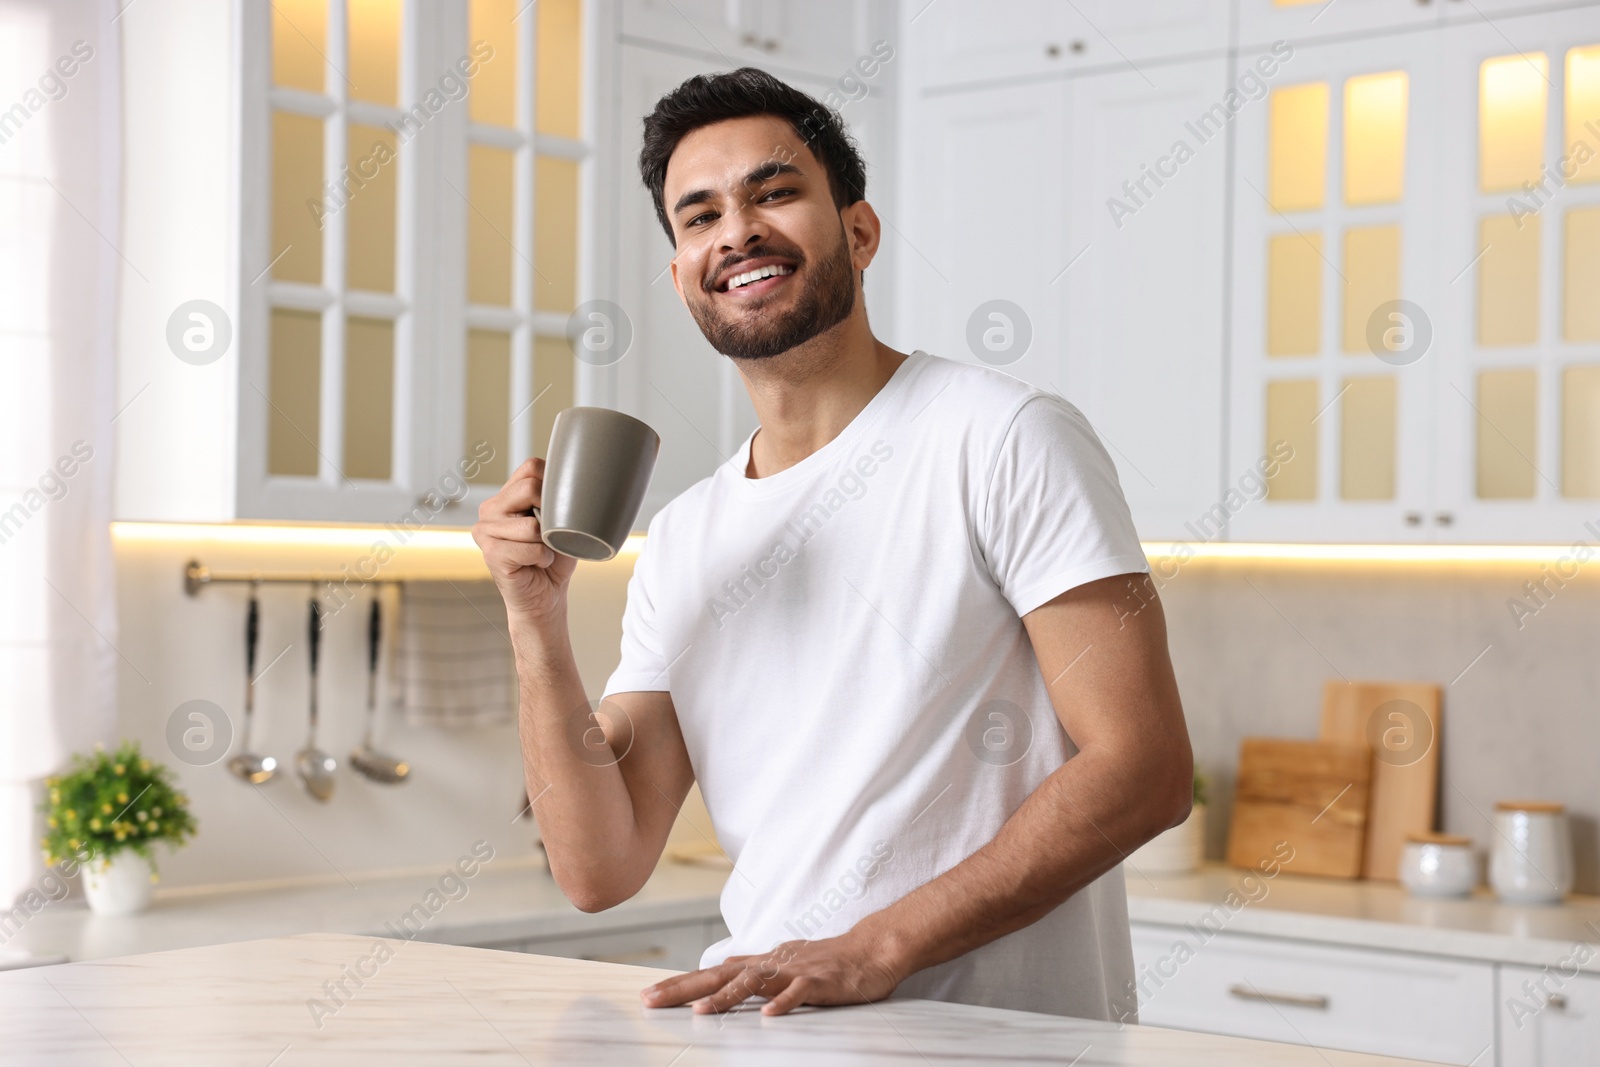 Photo of Morning of happy man with cup of hot drink at table in kitchen